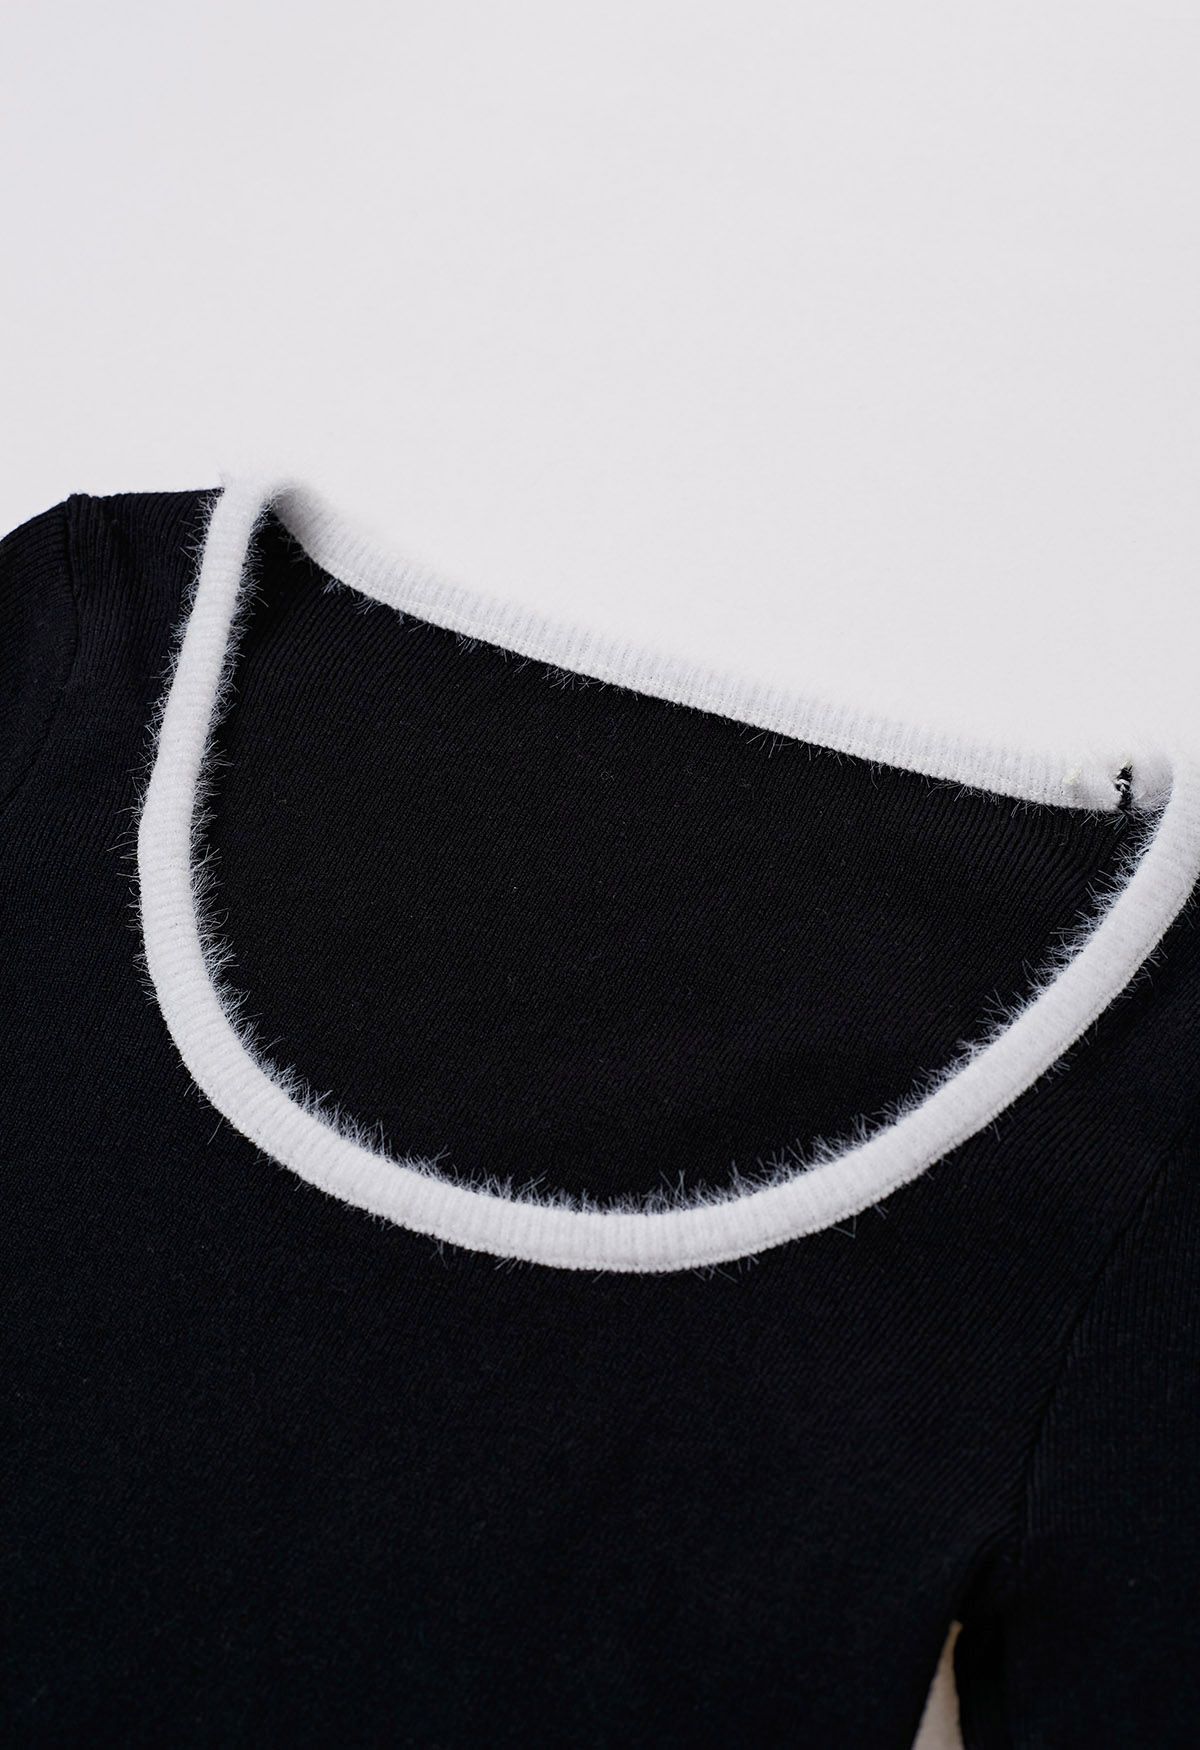 Fuzzy Contrast Edge Scoop Neck Fitted Top in Black